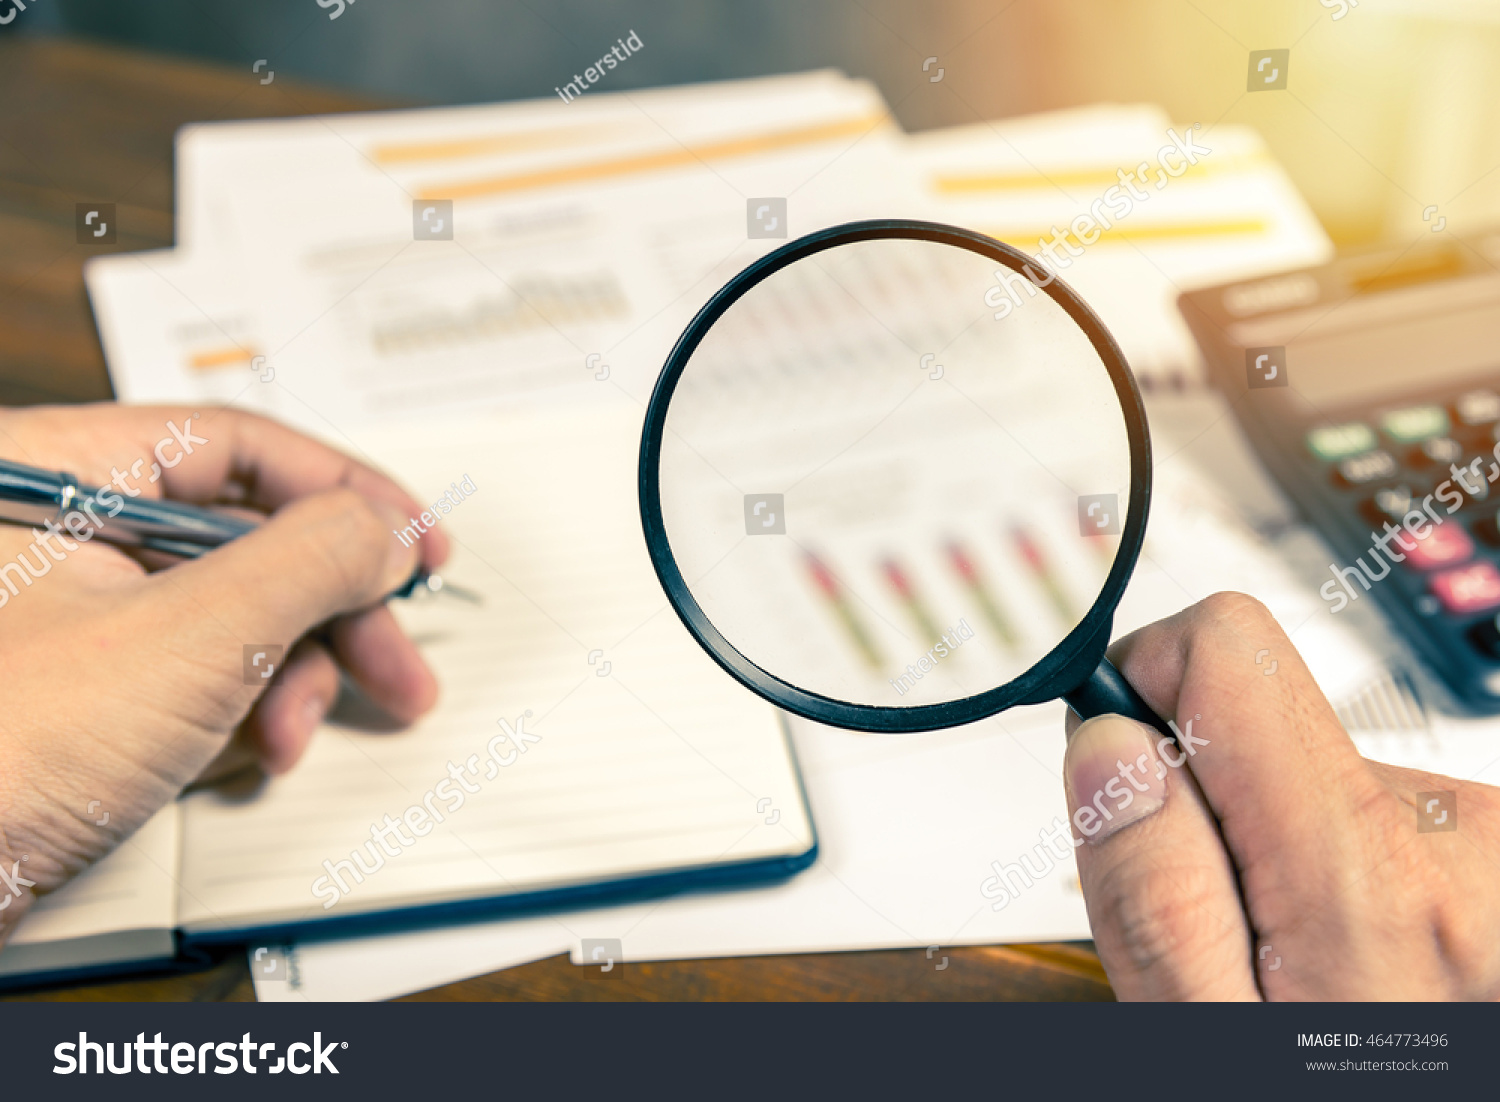 Man hand holding magnifying glass analyzing business financial data. Photo with sunlight filter effect. #464773496